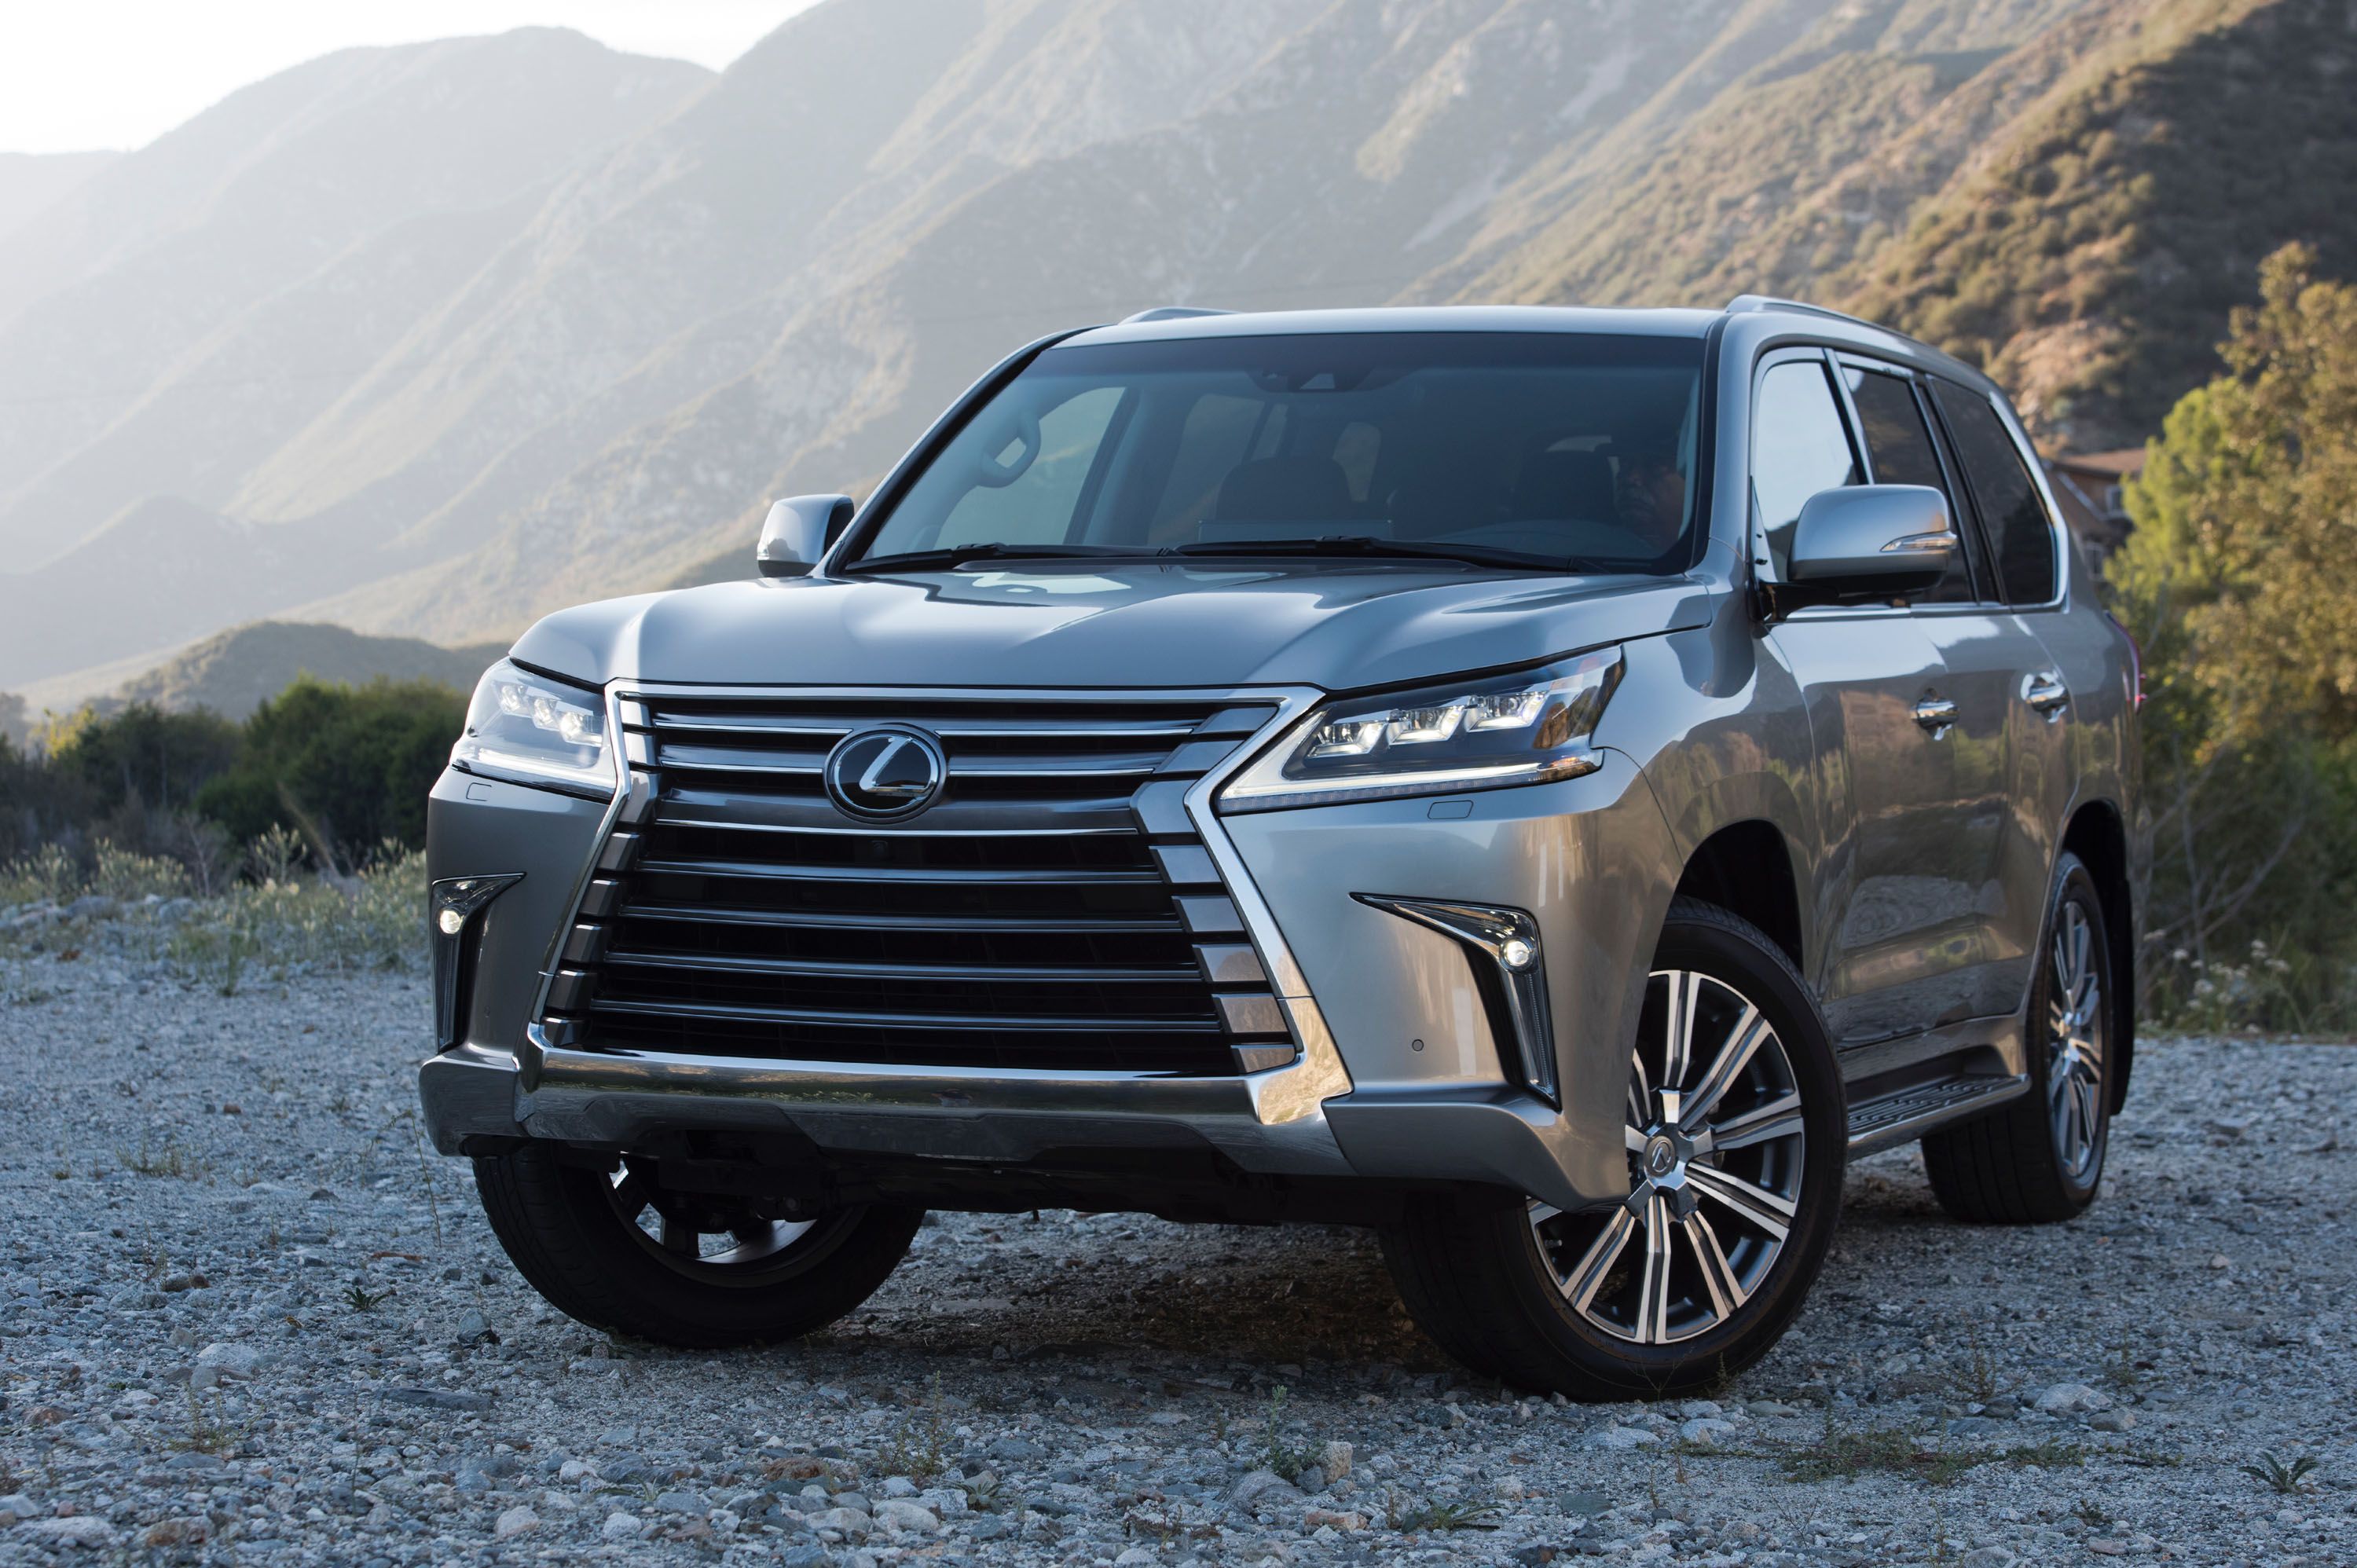 2019 Lexus Lx Review Pricing And Specs